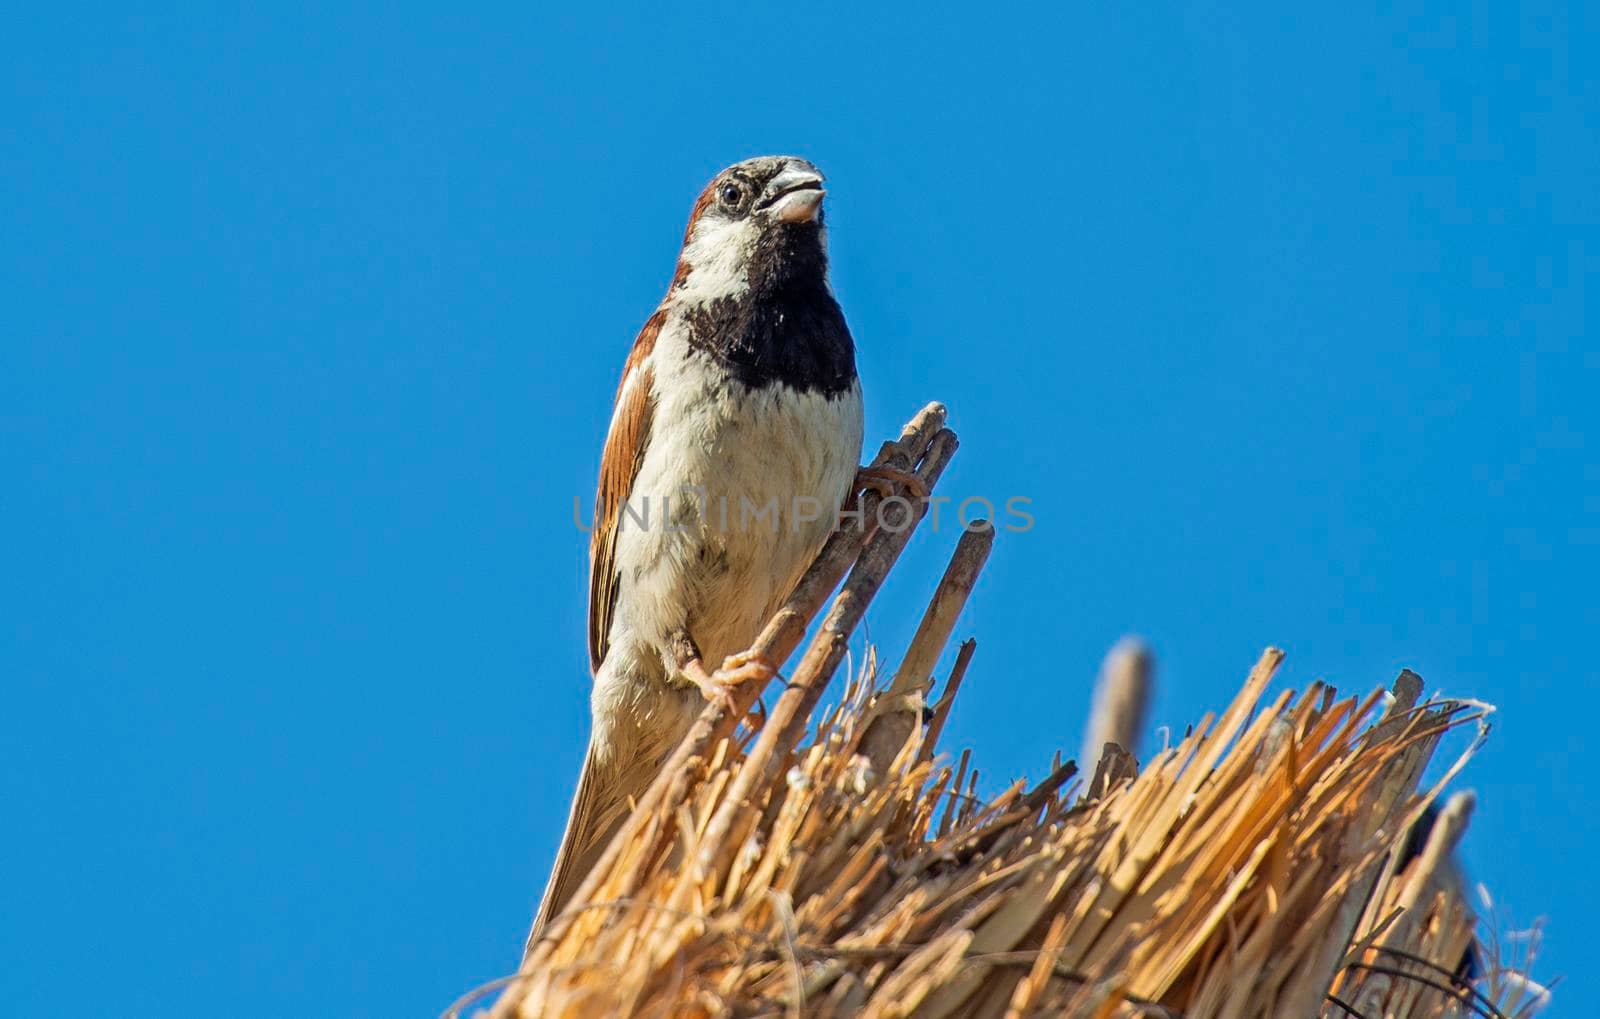 House sparrow passer domesticus stood perched on top of straw thatched roof against blue sky background